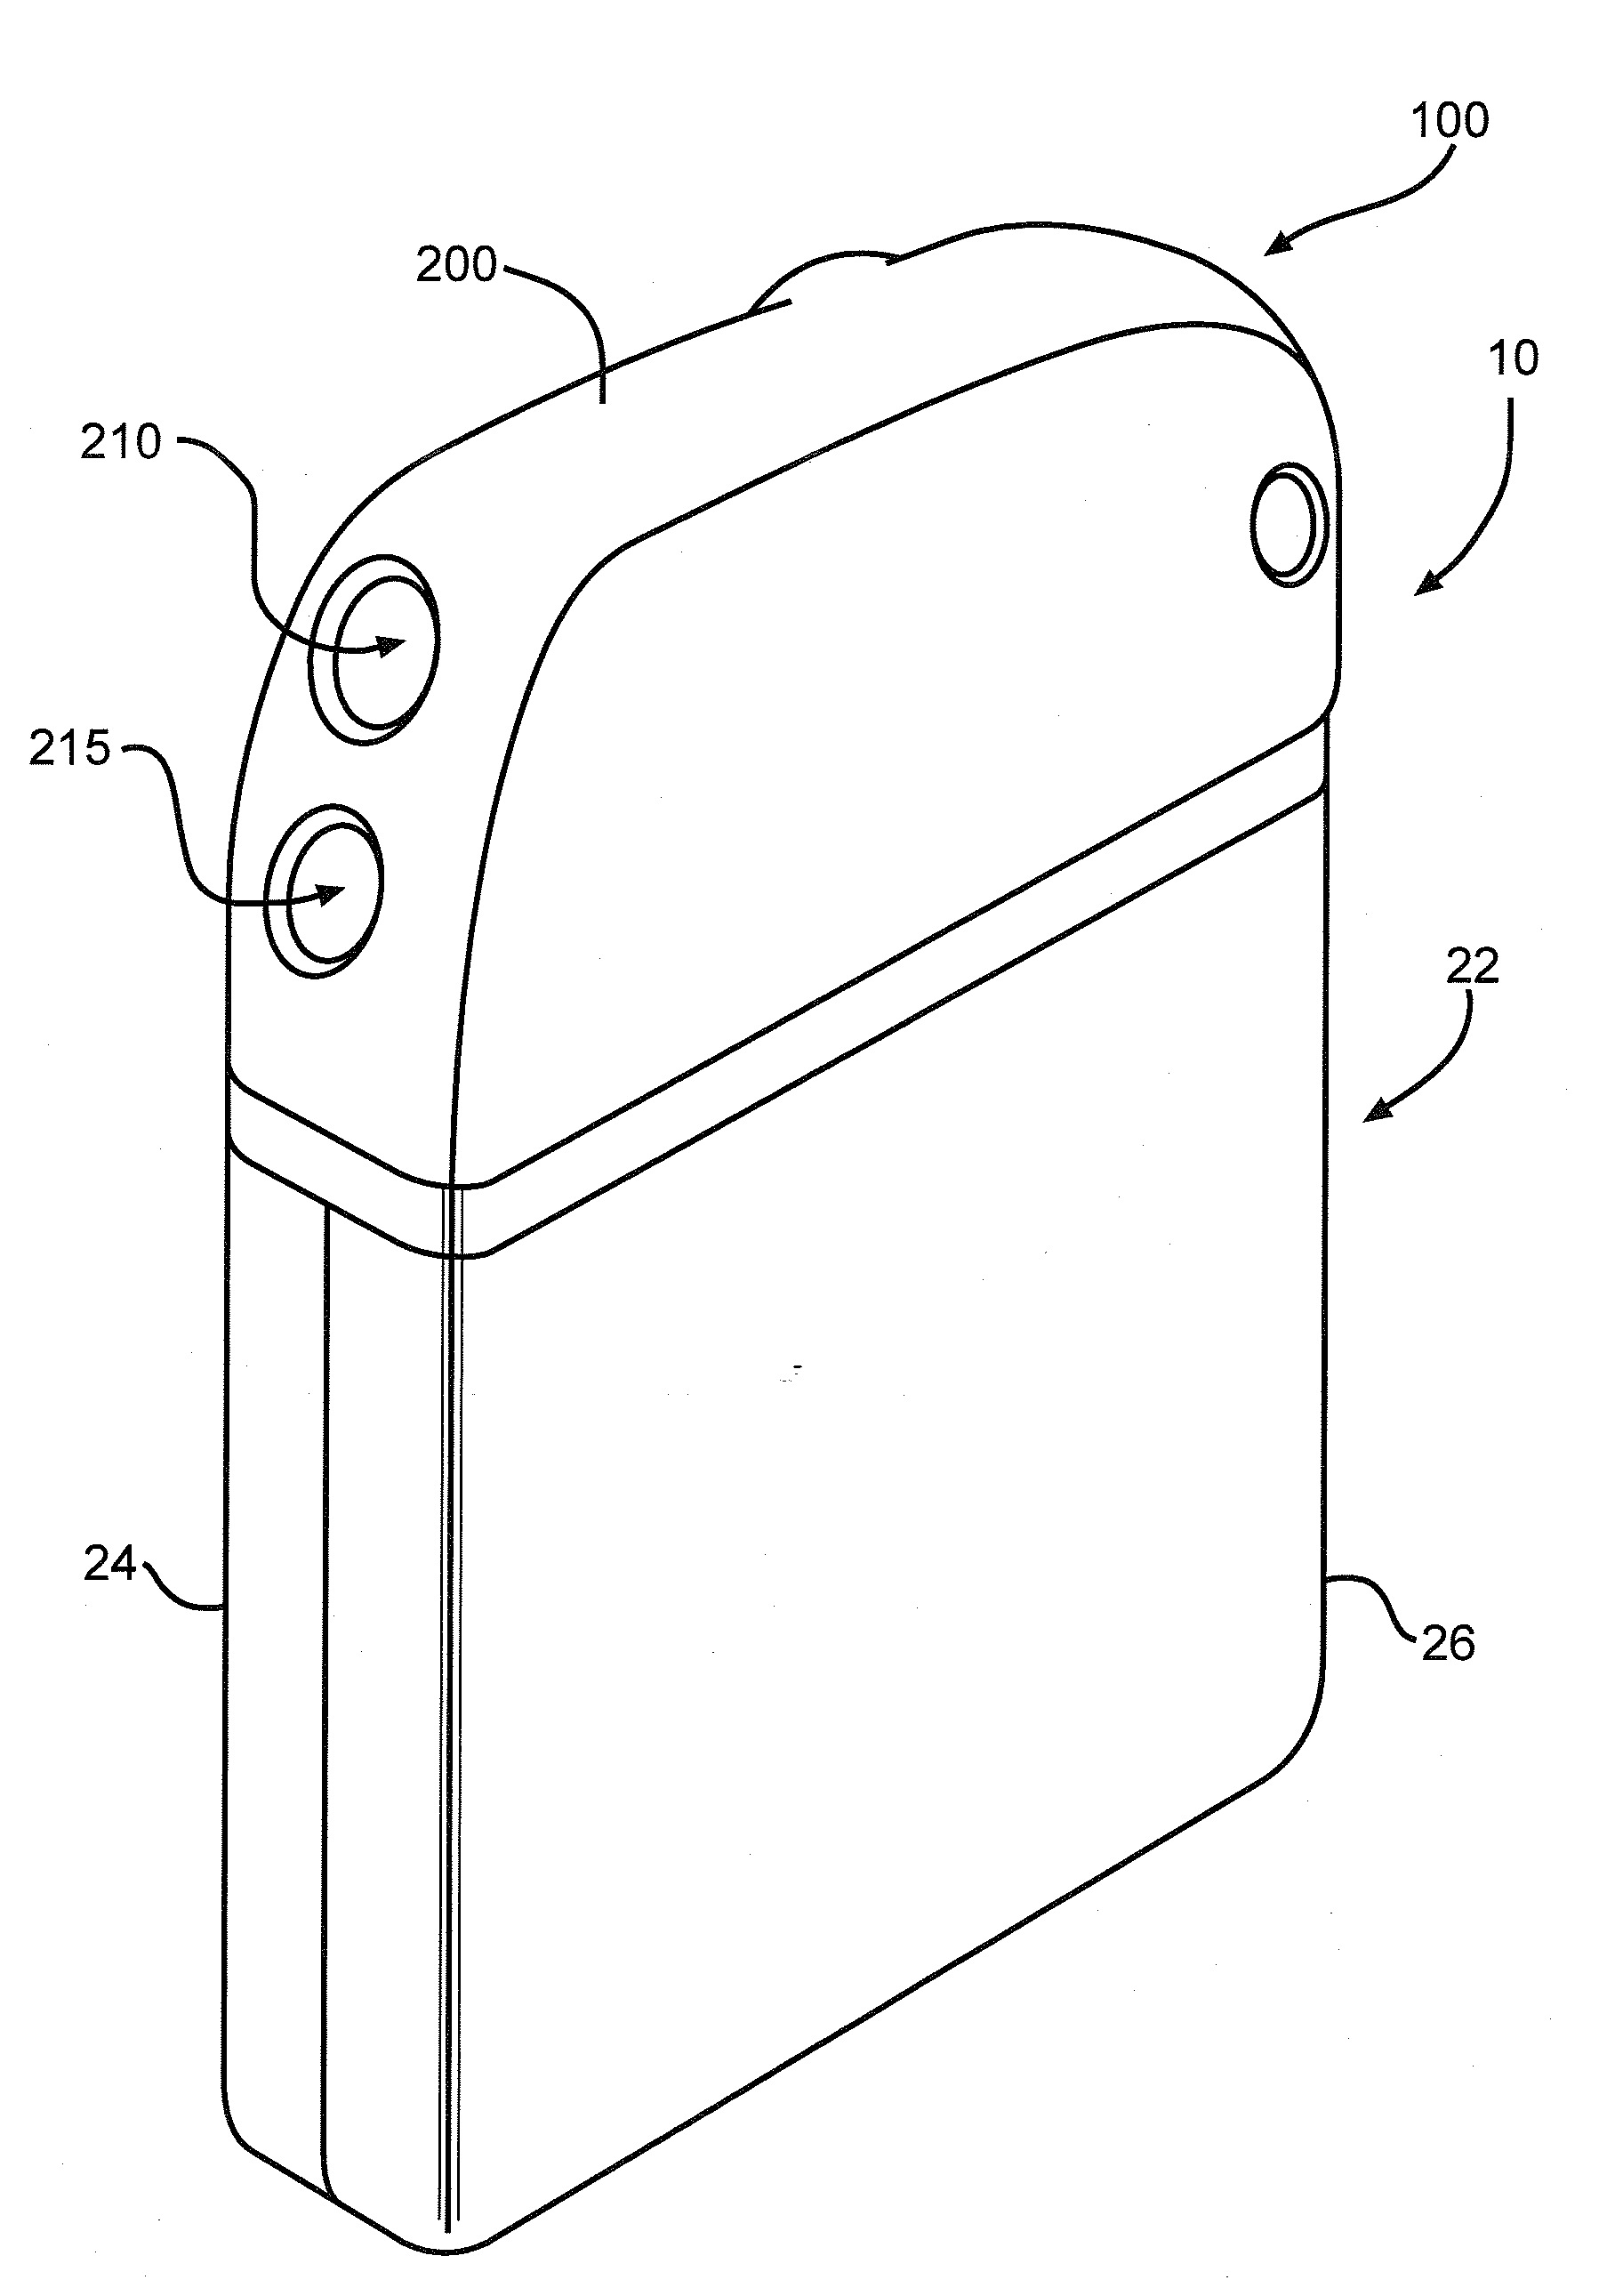 Header over-molded on a feedthrough assembly for an implantable device